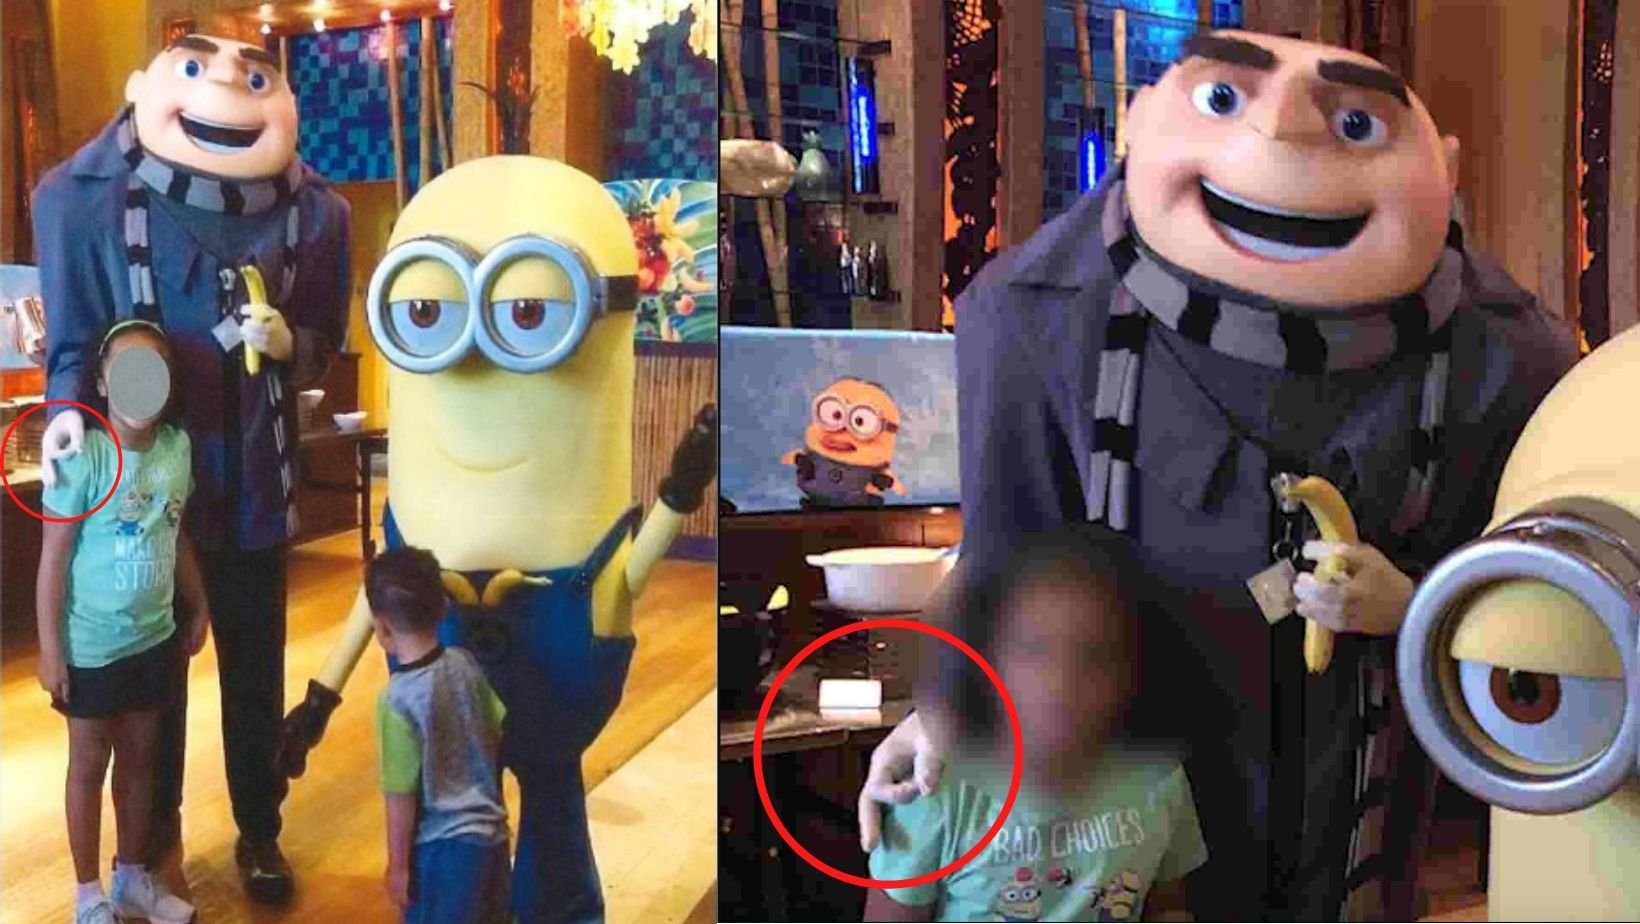 small joys thumbnail 4 2.jpg?resize=412,232 - Universal Orlando Is Sued After 'Gru' Made Supremacist 'OK' Handsign During A Photo-Op With Two Black Kids